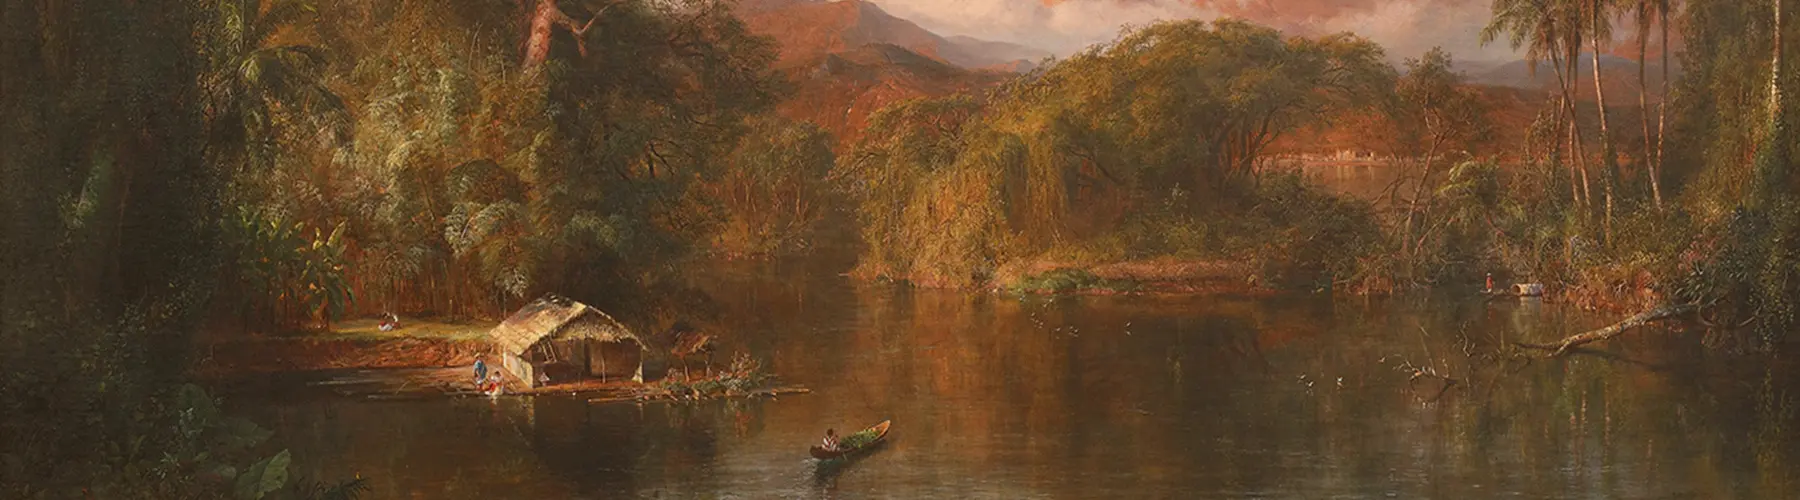 painting of boat on lake with mountains in background